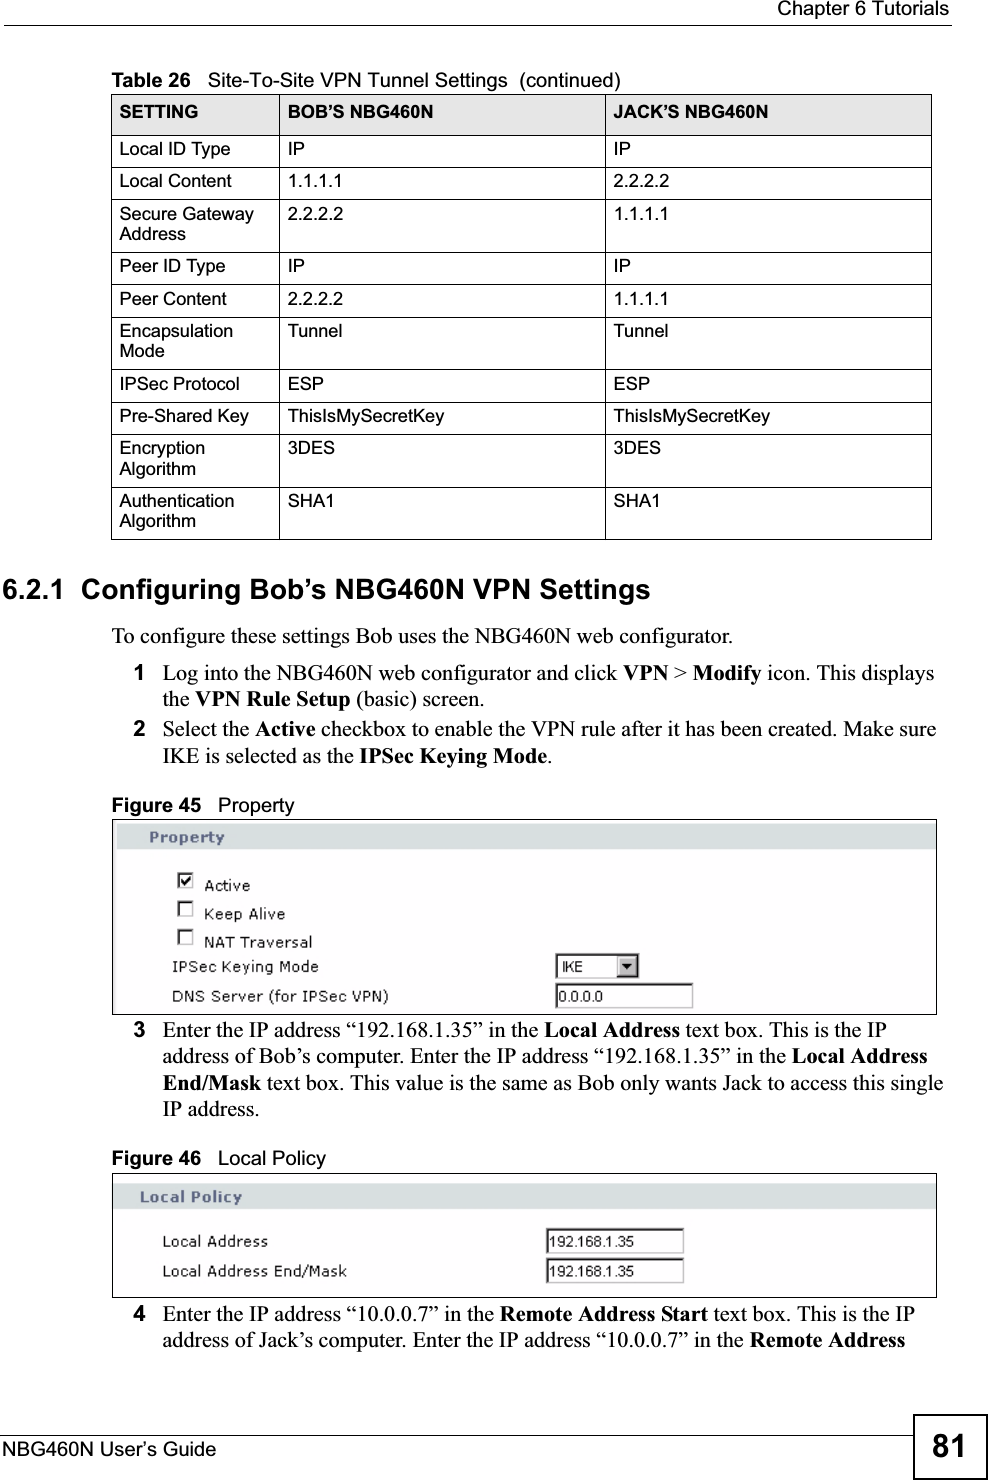  Chapter 6 TutorialsNBG460N User’s Guide 816.2.1  Configuring Bob’s NBG460N VPN SettingsTo configure these settings Bob uses the NBG460N web configurator.1Log into the NBG460N web configurator and click VPN &gt; Modify icon. This displays the VPN Rule Setup (basic) screen.2Select the Active checkbox to enable the VPN rule after it has been created. Make sure IKE is selected as the IPSec Keying Mode.Figure 45   Property3Enter the IP address “192.168.1.35” in the Local Address text box. This is the IP address of Bob’s computer. Enter the IP address “192.168.1.35” in the Local Address End/Mask text box. This value is the same as Bob only wants Jack to access this single IP address.Figure 46   Local Policy4Enter the IP address “10.0.0.7” in the Remote Address Start text box. This is the IP address of Jack’s computer. Enter the IP address “10.0.0.7” in the Remote Address Local ID Type IP IPLocal Content 1.1.1.1 2.2.2.2Secure Gateway Address2.2.2.2 1.1.1.1Peer ID Type IP IPPeer Content 2.2.2.2 1.1.1.1Encapsulation ModeTunnel TunnelIPSec Protocol ESP ESPPre-Shared Key ThisIsMySecretKey ThisIsMySecretKeyEncryption Algorithm3DES 3DESAuthentication AlgorithmSHA1 SHA1Table 26   Site-To-Site VPN Tunnel Settings  (continued)SETTING BOB’S NBG460N JACK’S NBG460N